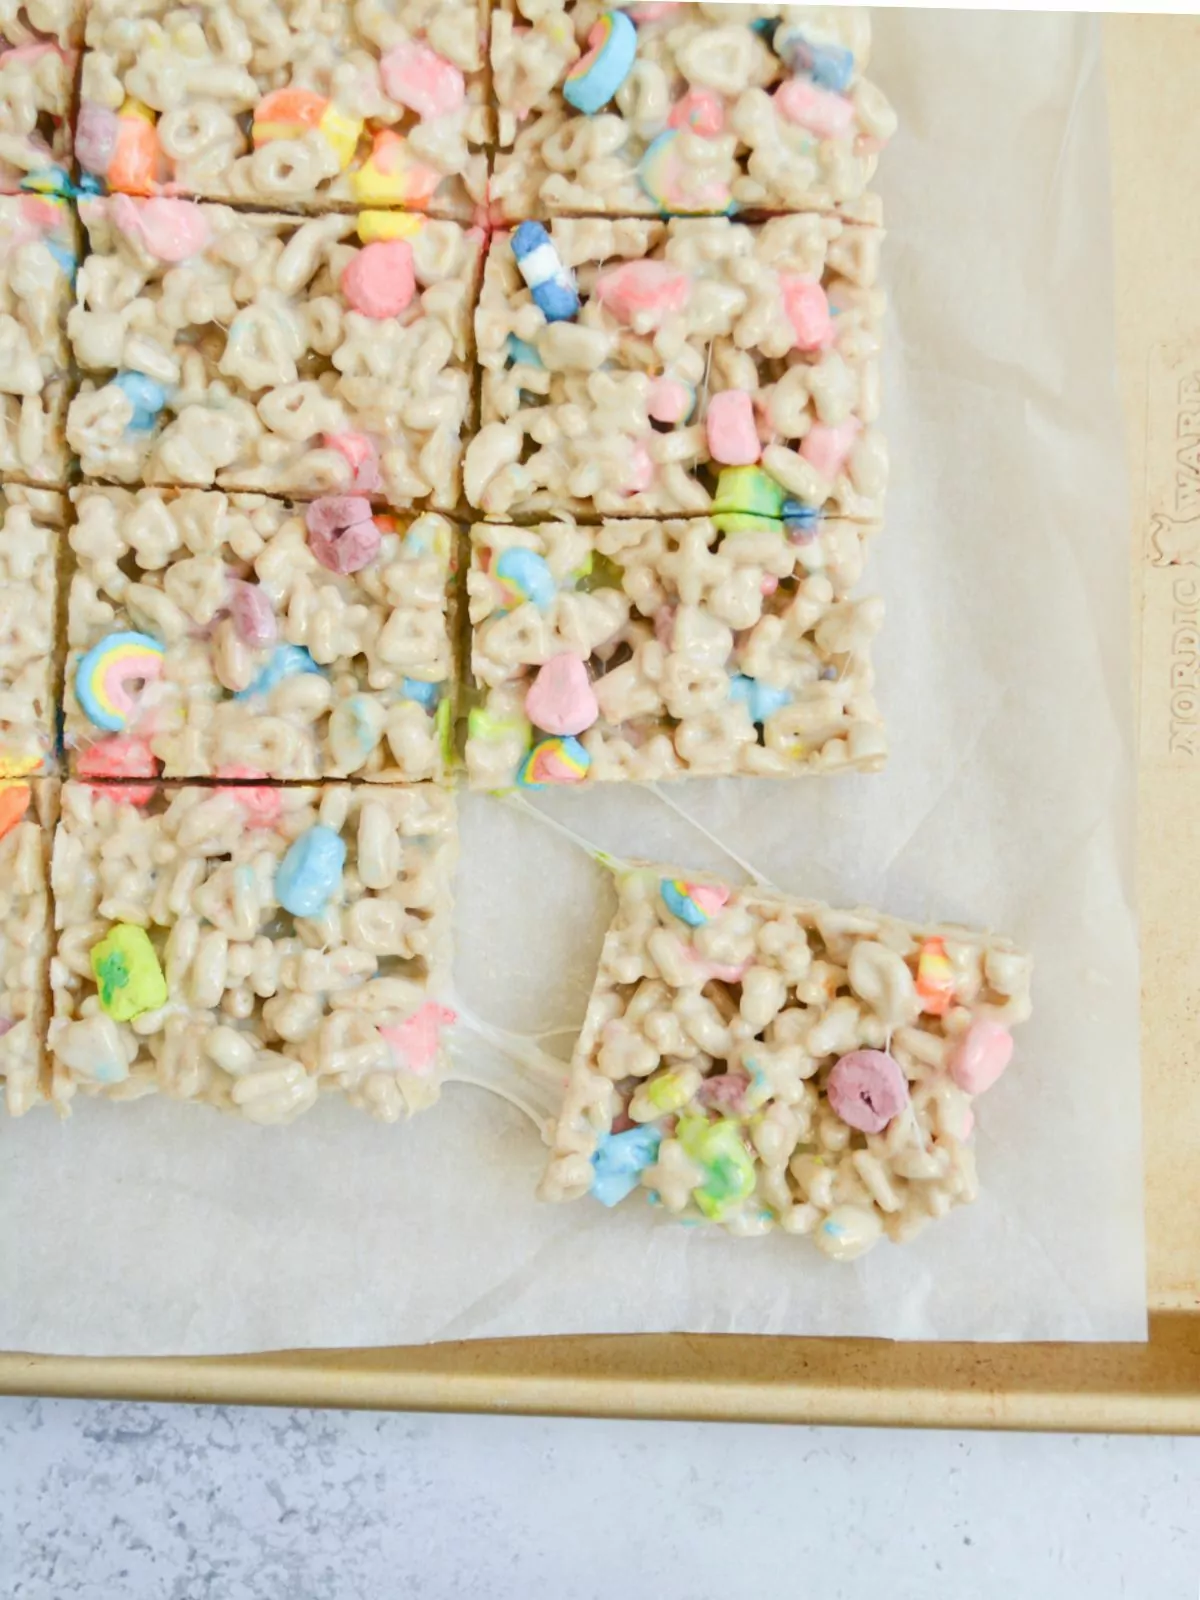 no bake cereal bars sliced and pulled apart on baking tray.